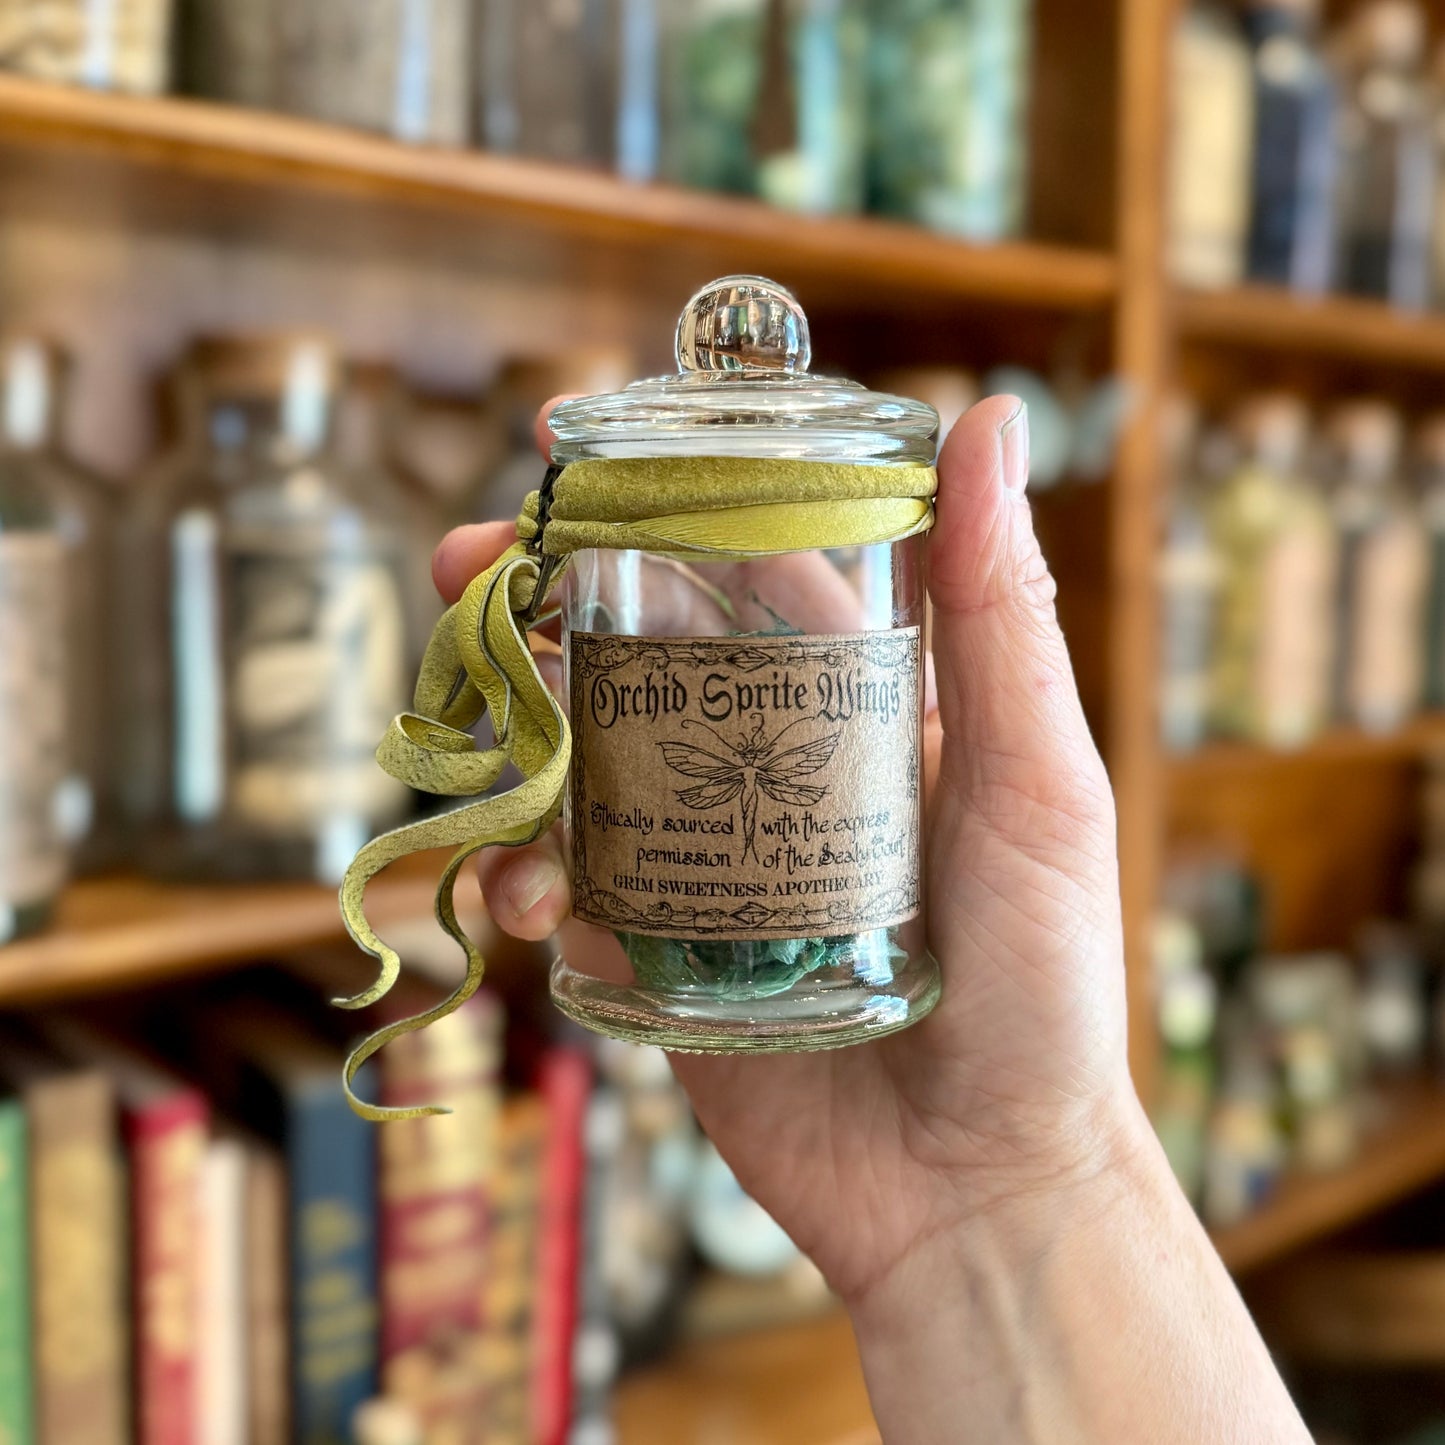 Orchid Sprite Wings, A Decorative Apothecary Jar